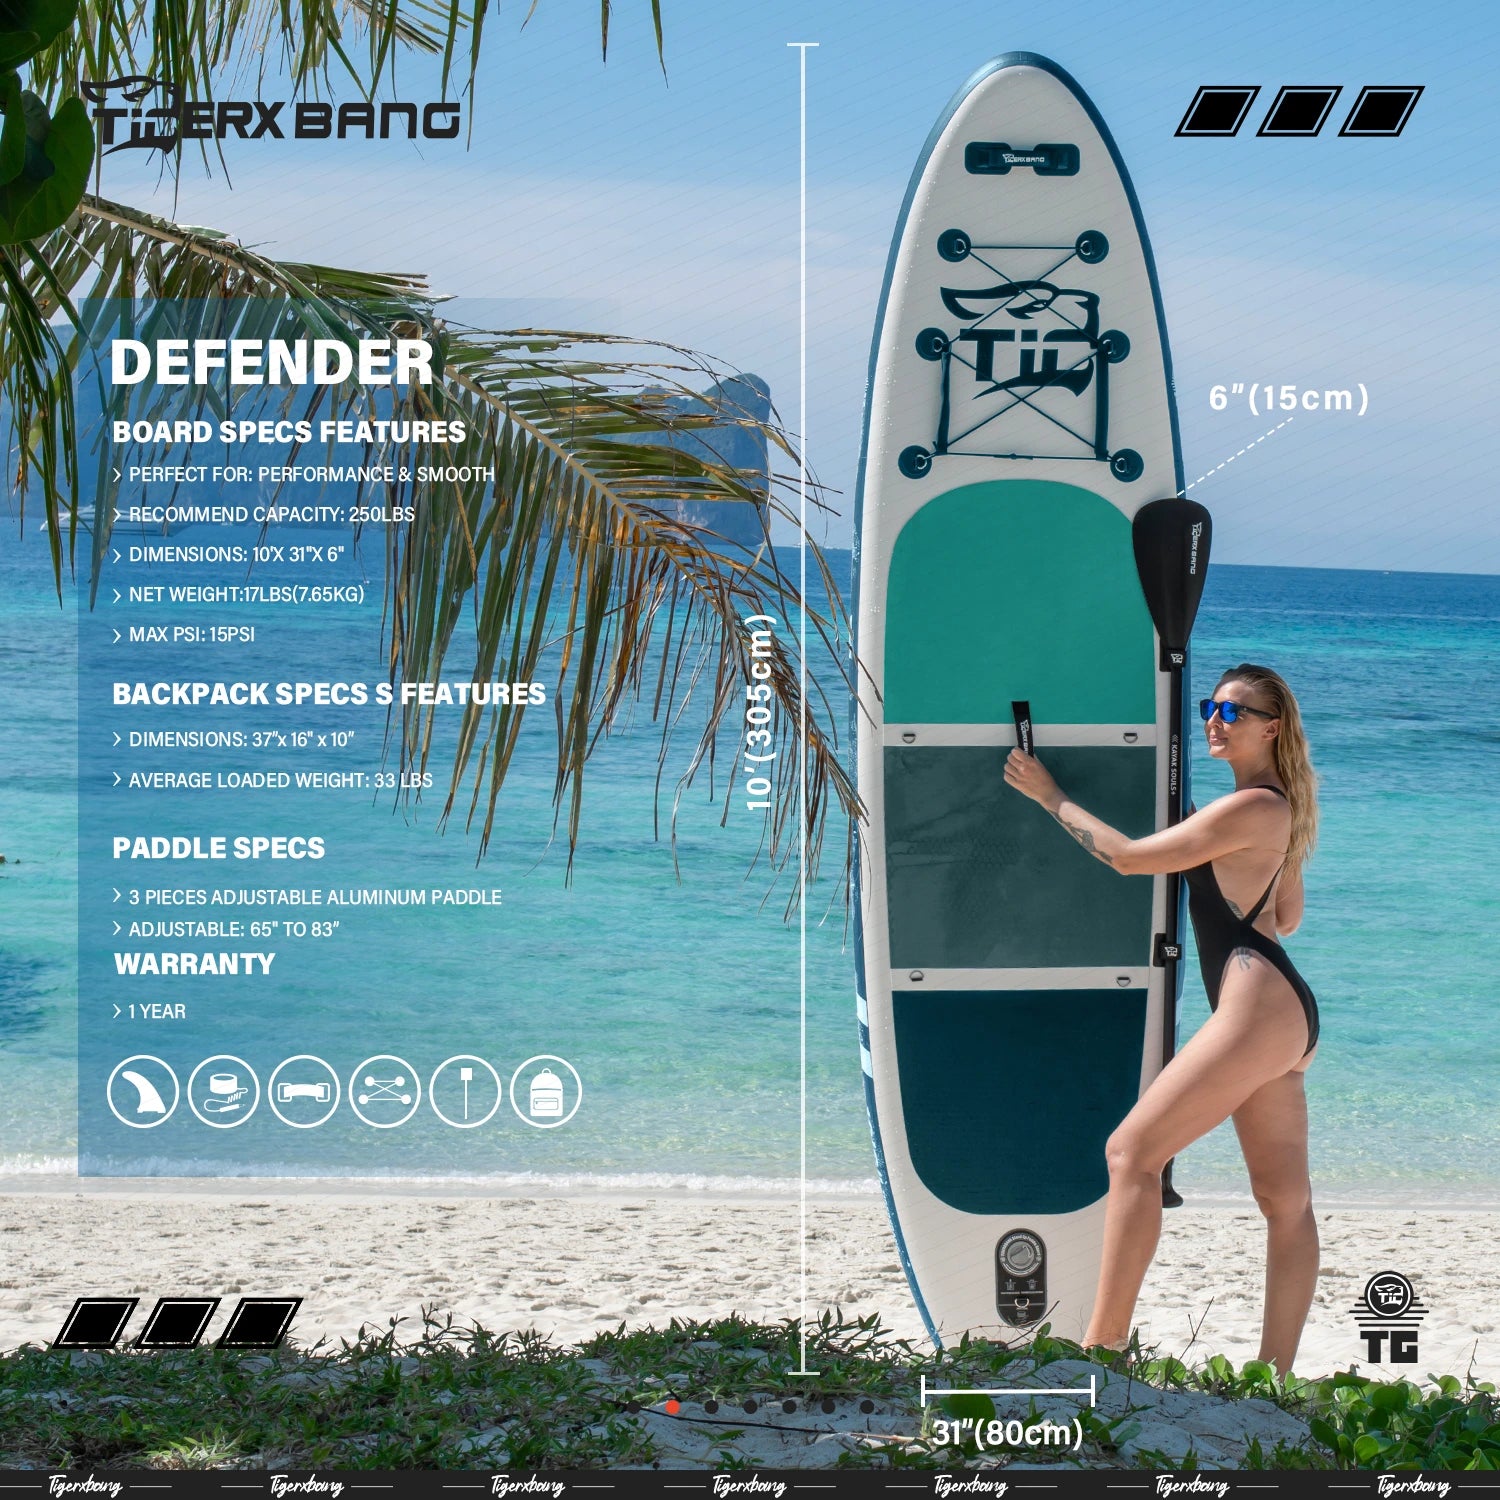 TIGERXBANG Defender 10' All Round Stand Up Paddle Boards